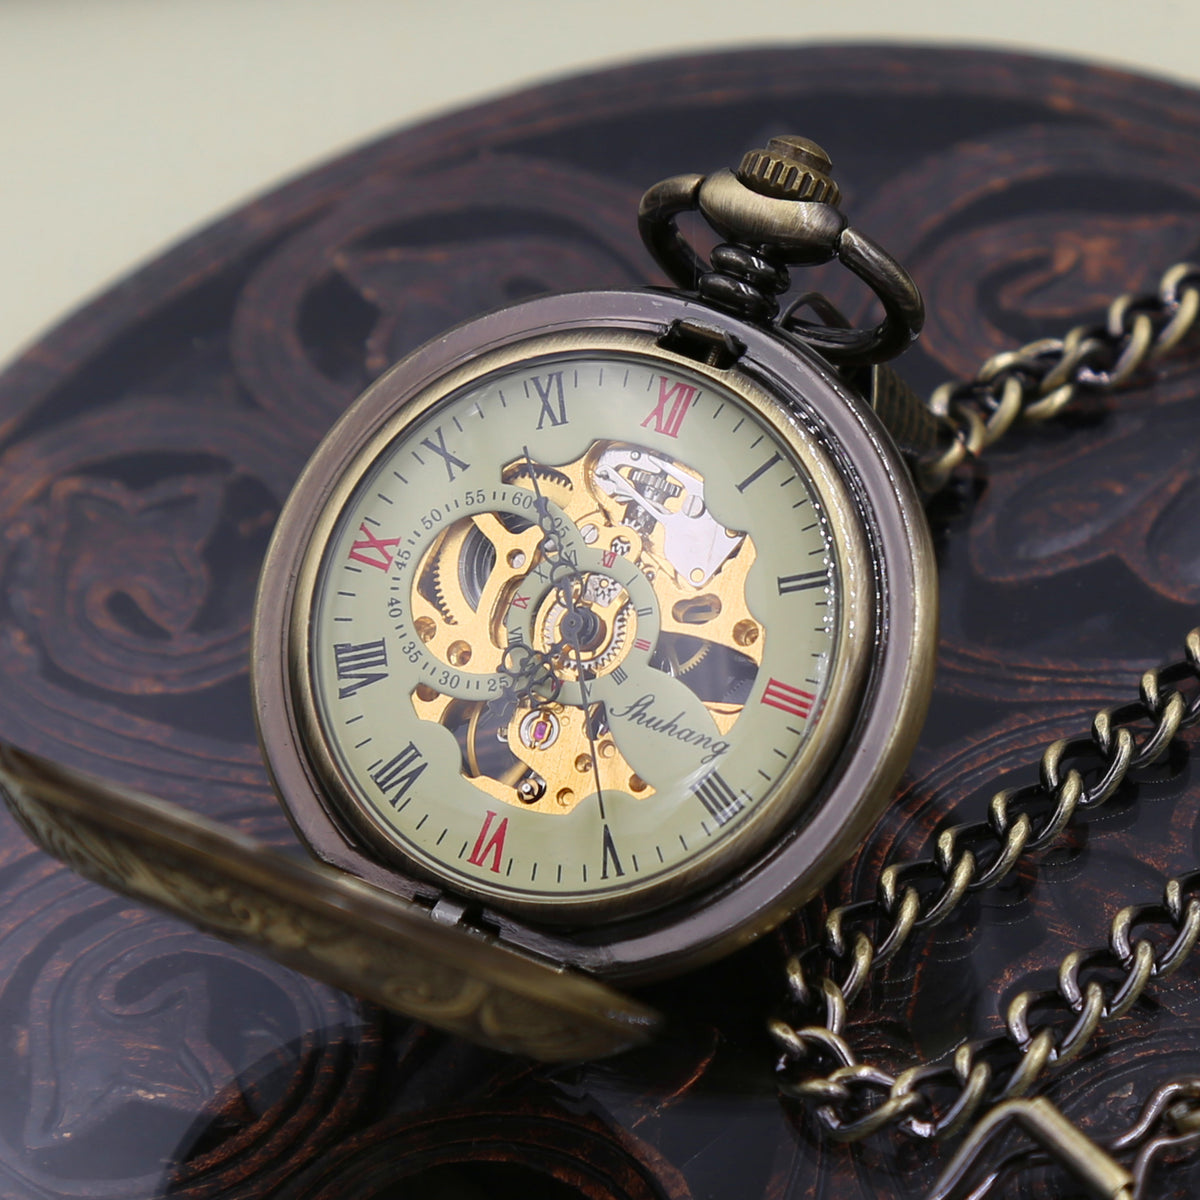 Mens Personalized Pocket Watch with chain - Antique bronze - Steampunk - Mechanical watch WEDDING GIFT VM009